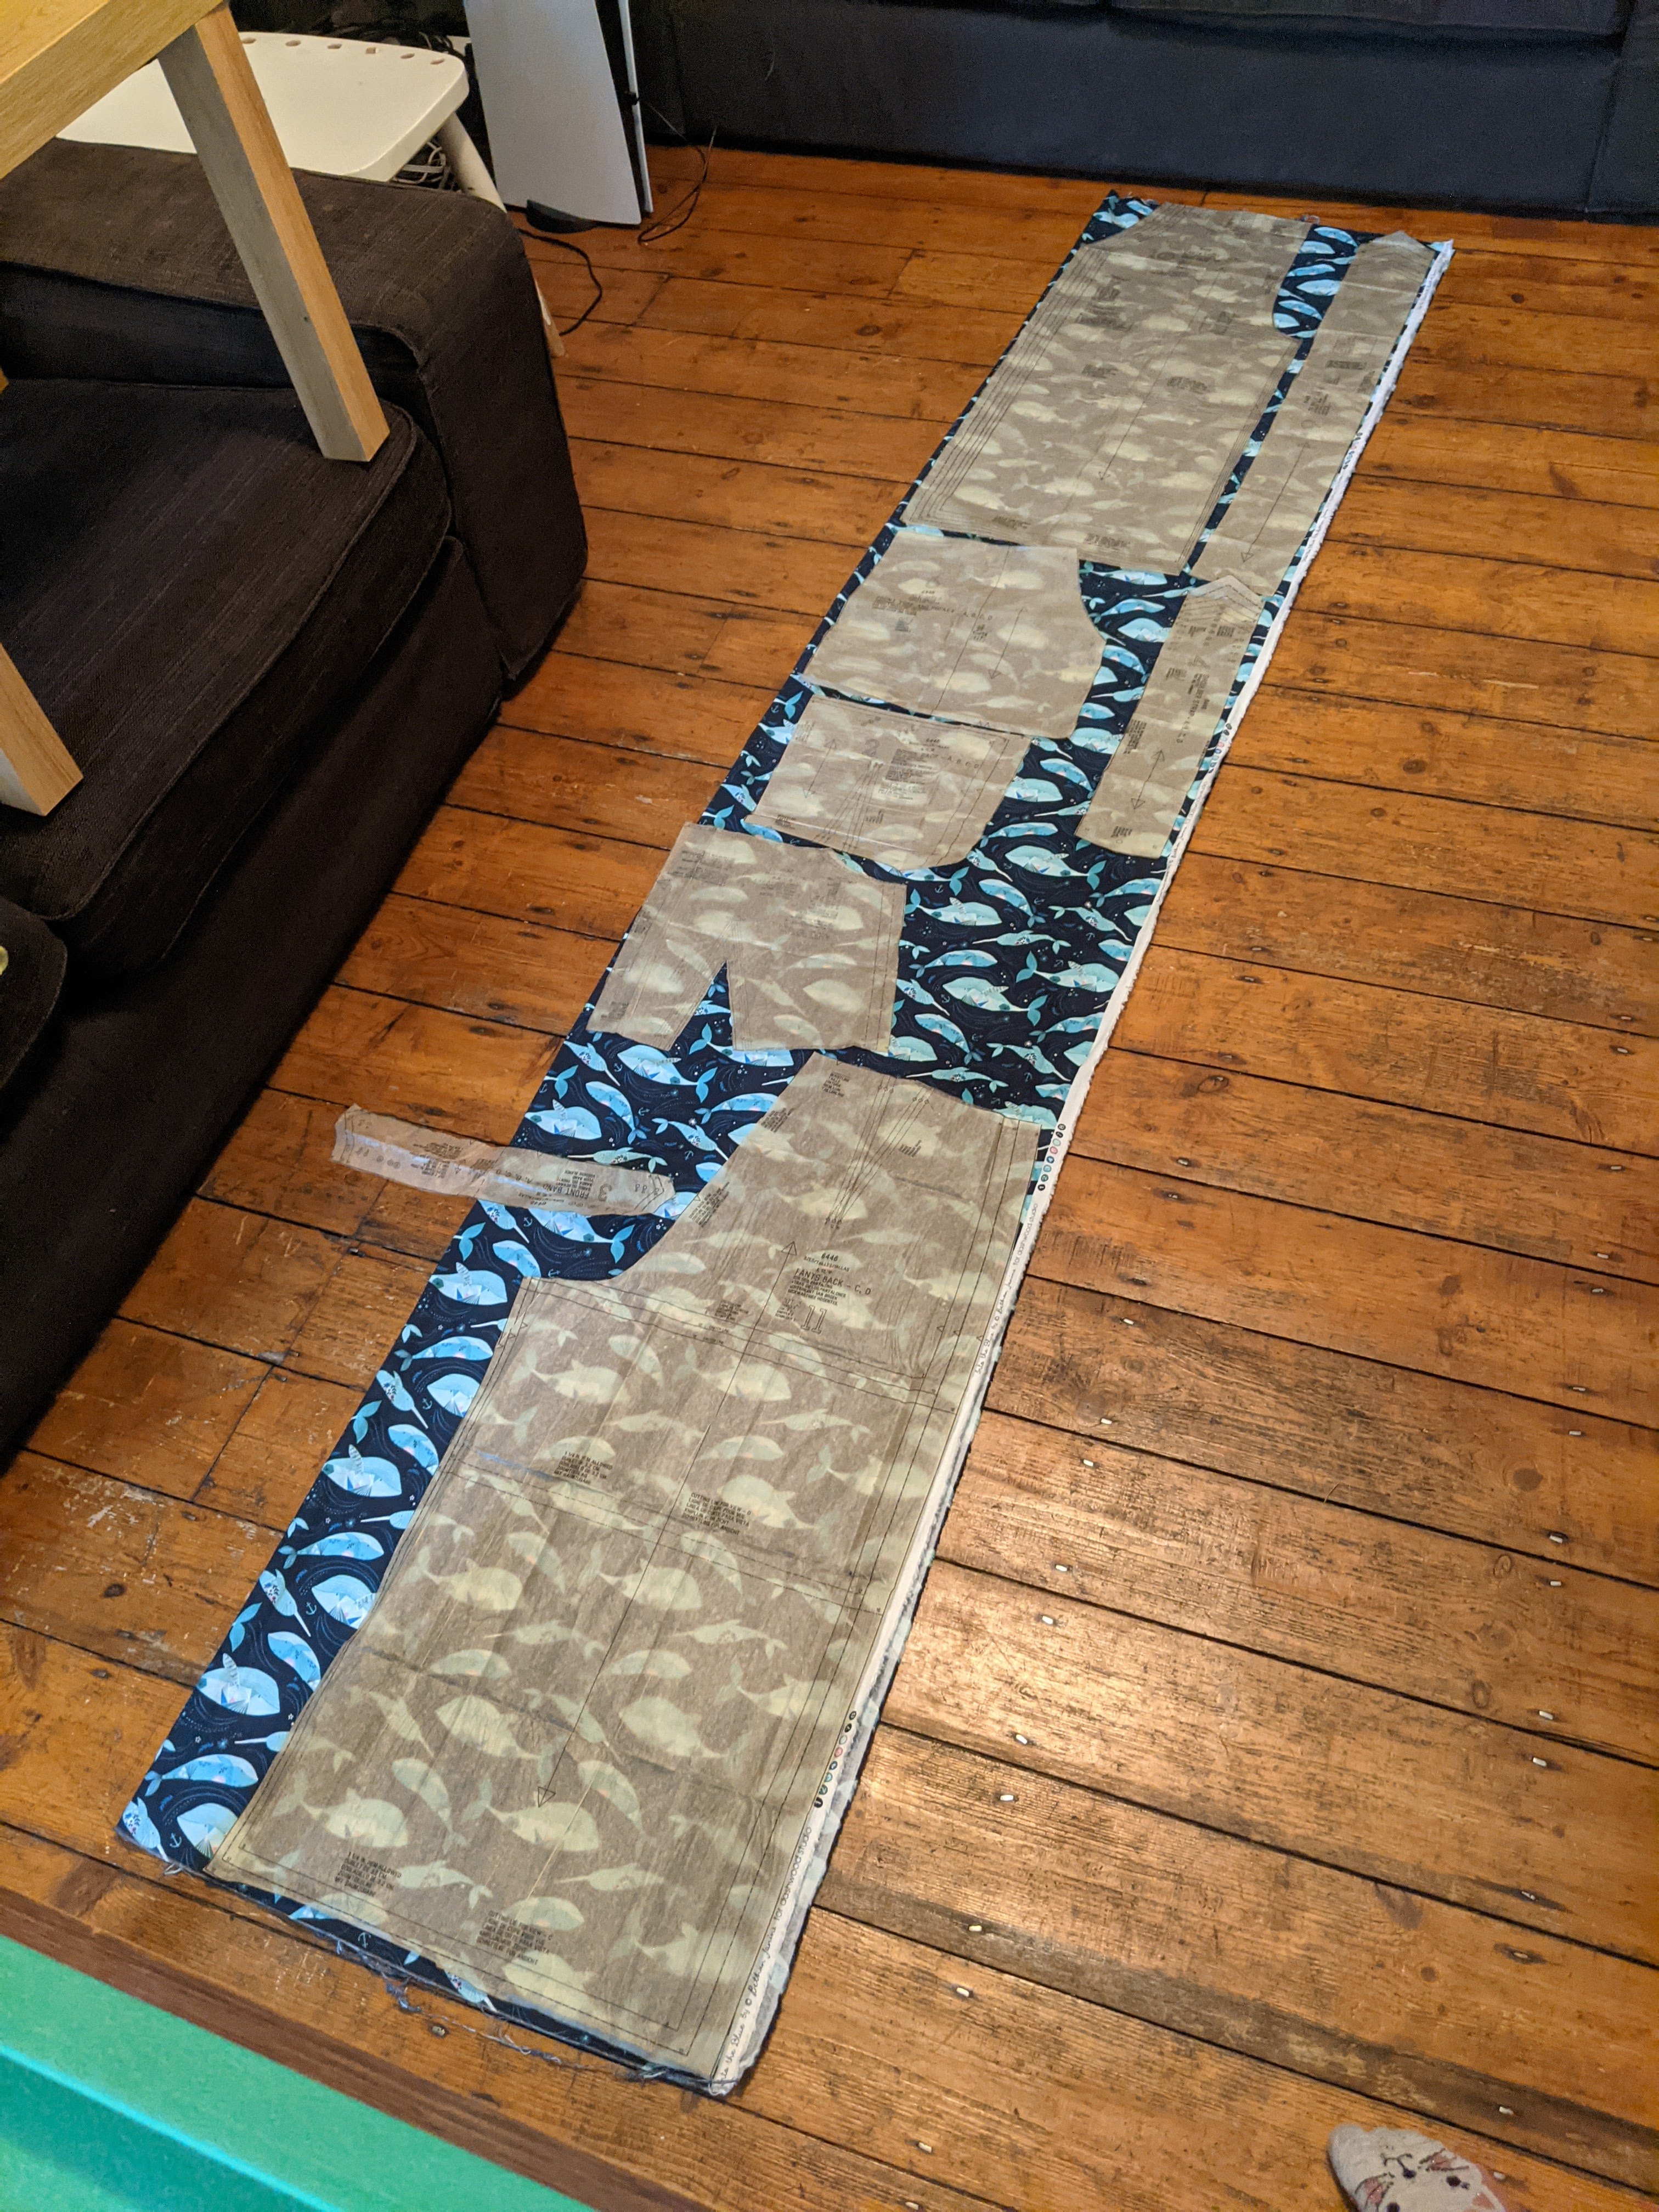 Narwhal fabric laid out on the floor, with sewing pattern pieces laid out on top of it, ready for cutting out